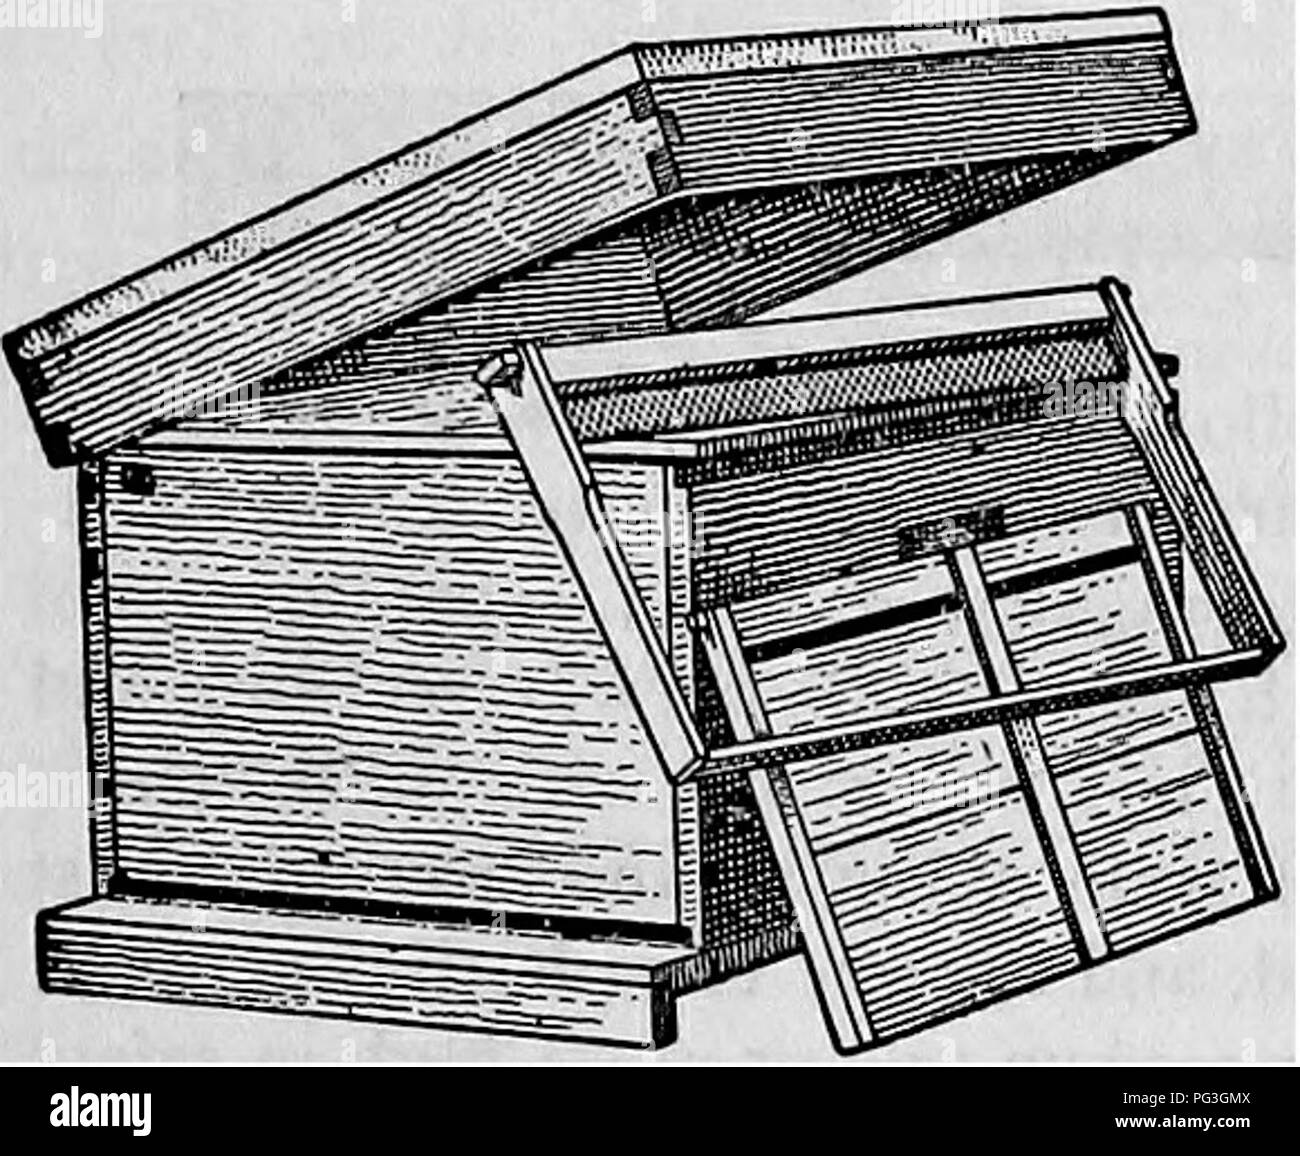 . Fifty-seventh annual price list of Italian bees, queens and bee keepers' supplies. Bees; Bee culture. BEE-KEEPERS' SUPPLIES One Story Simplicity Langstrotli Hive. This hive fig. 335 is one of the best styles in the market today and is preferred by many. It is similar in construction to the dovetailed style, comprising all of the important features, and has the additional ad- vantage of the rabbets which enables one to tier up the hives or supers without danger of their being easily knocked out of place. The body is 16Xx20x 9)4 deep and is strong in construction, the corners being grooved and Stock Photo